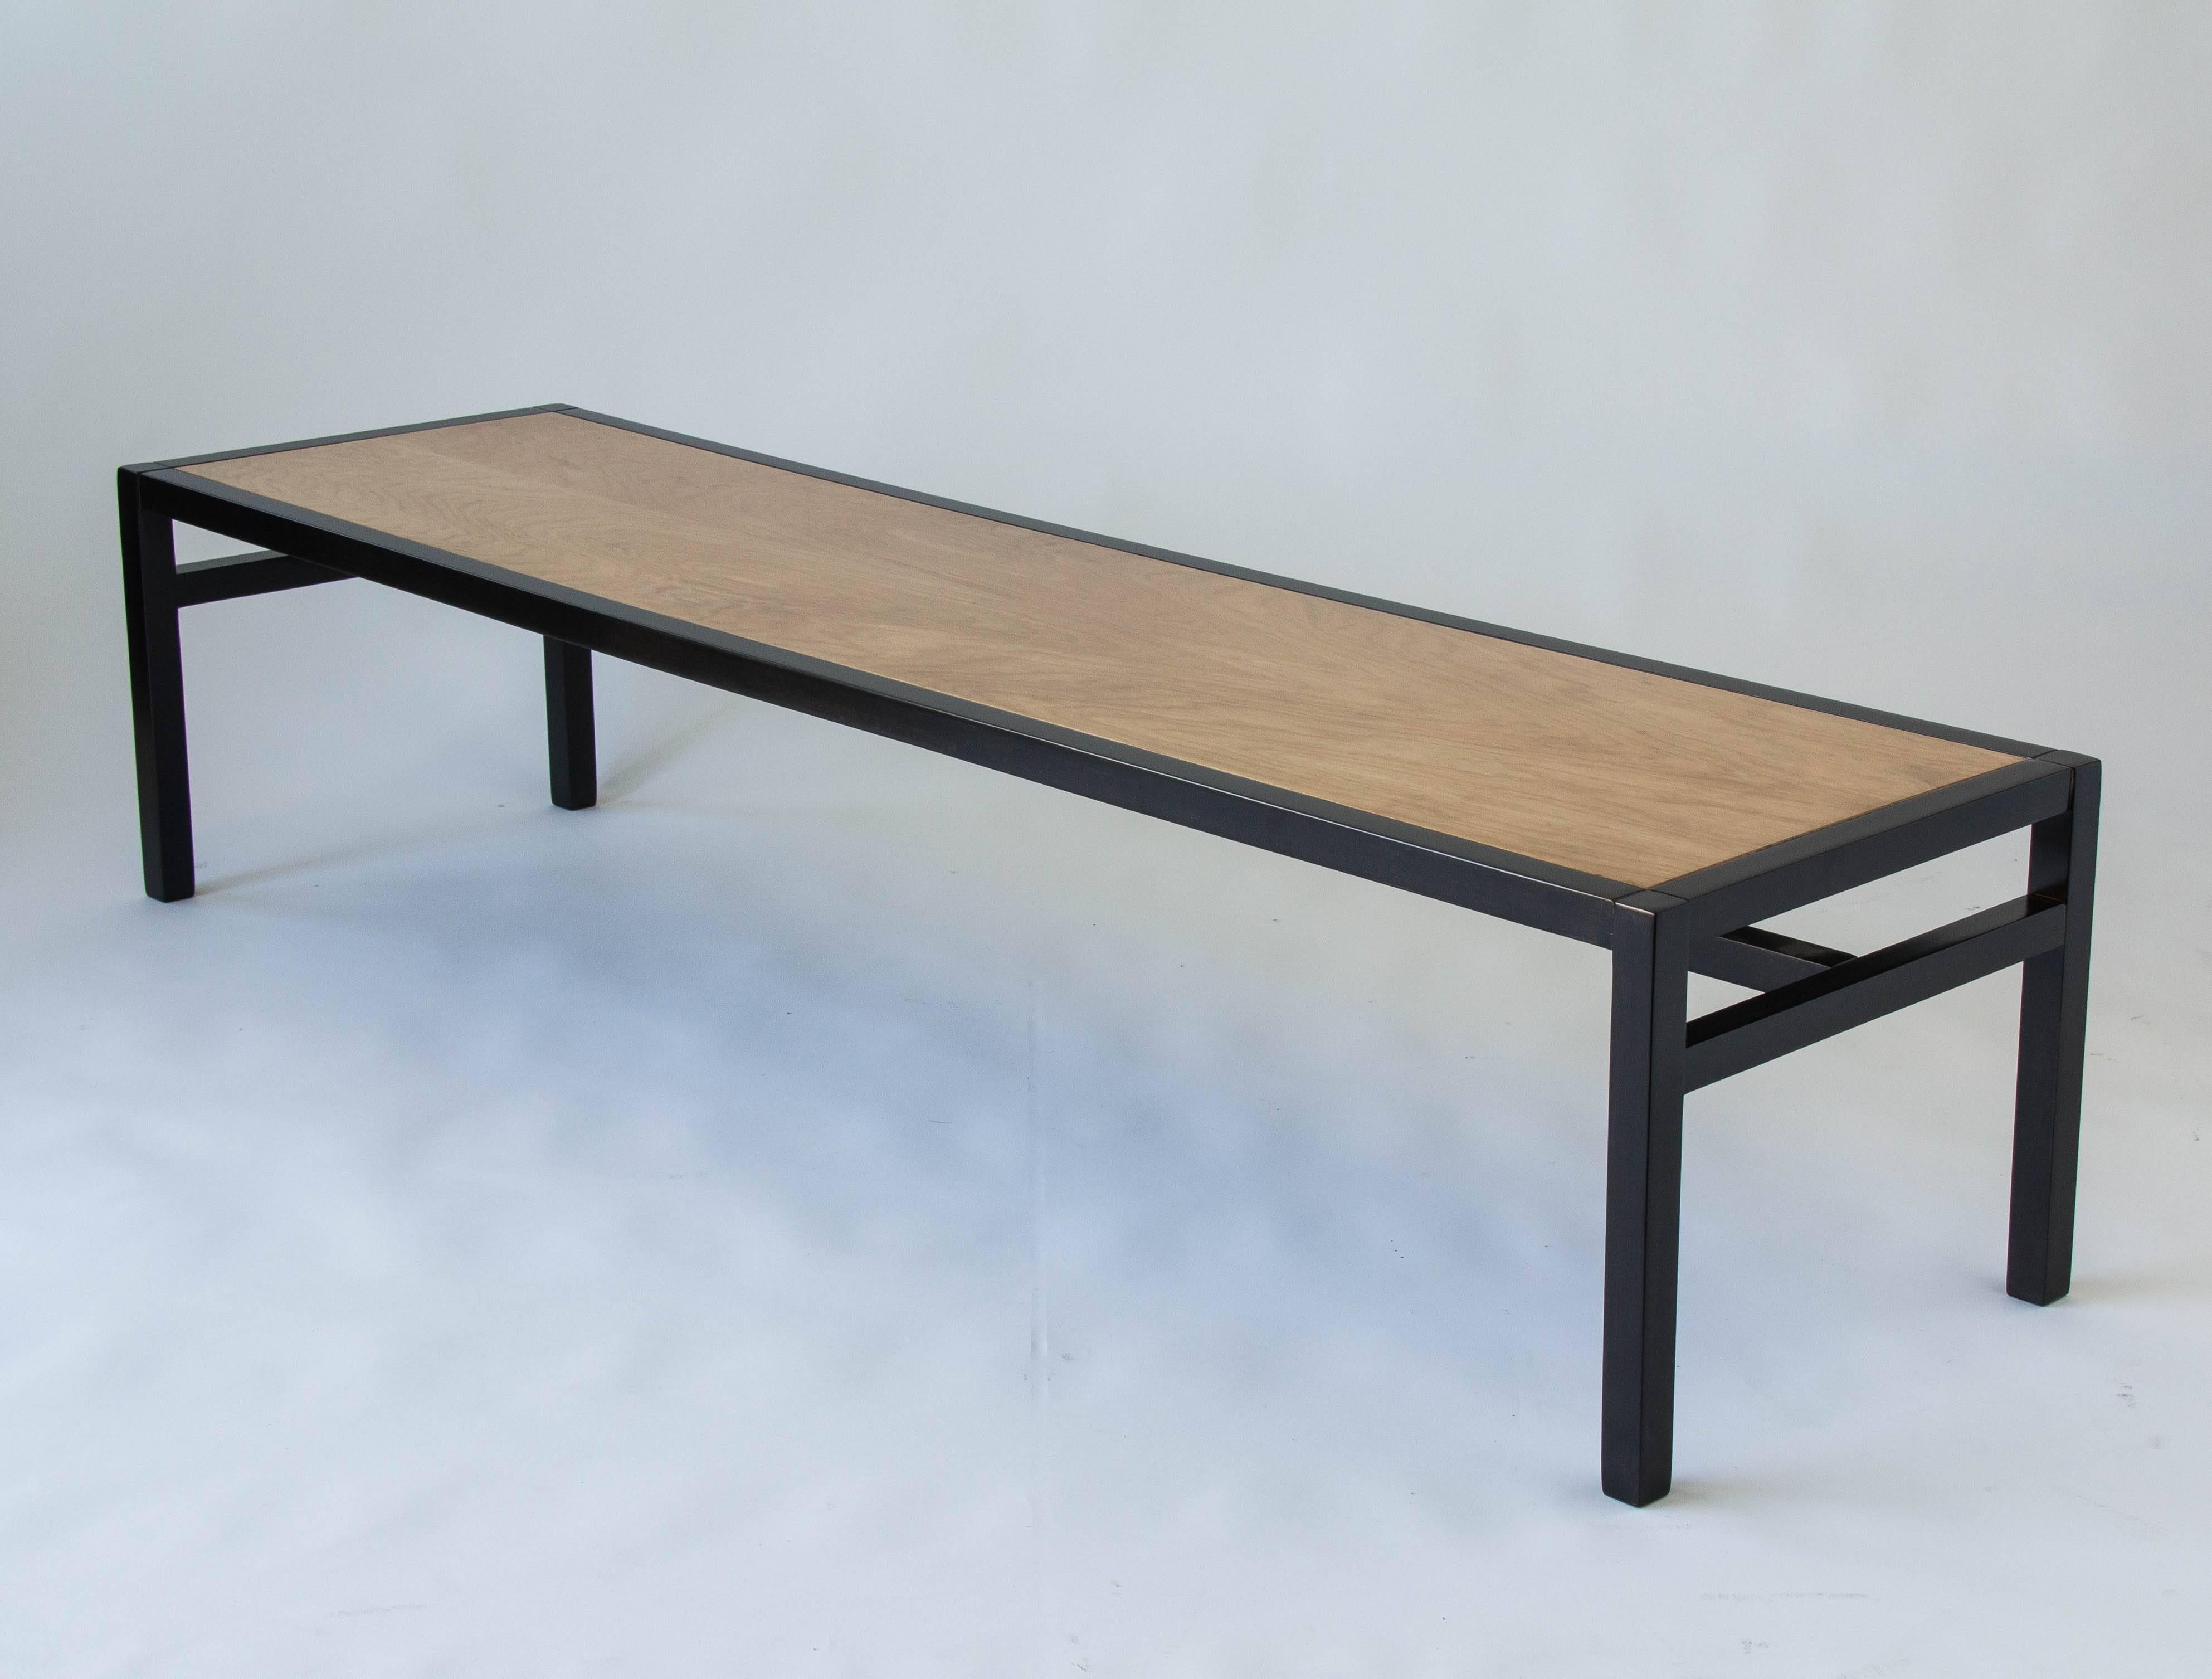 A dunbar-esque coffee table with deceptively simple construction and a two tone finish. The square legs are flush with the frame , and both have been ebonized. The contrasting inset tabletop is mahogany wood with subtle grain. Ebonized cross